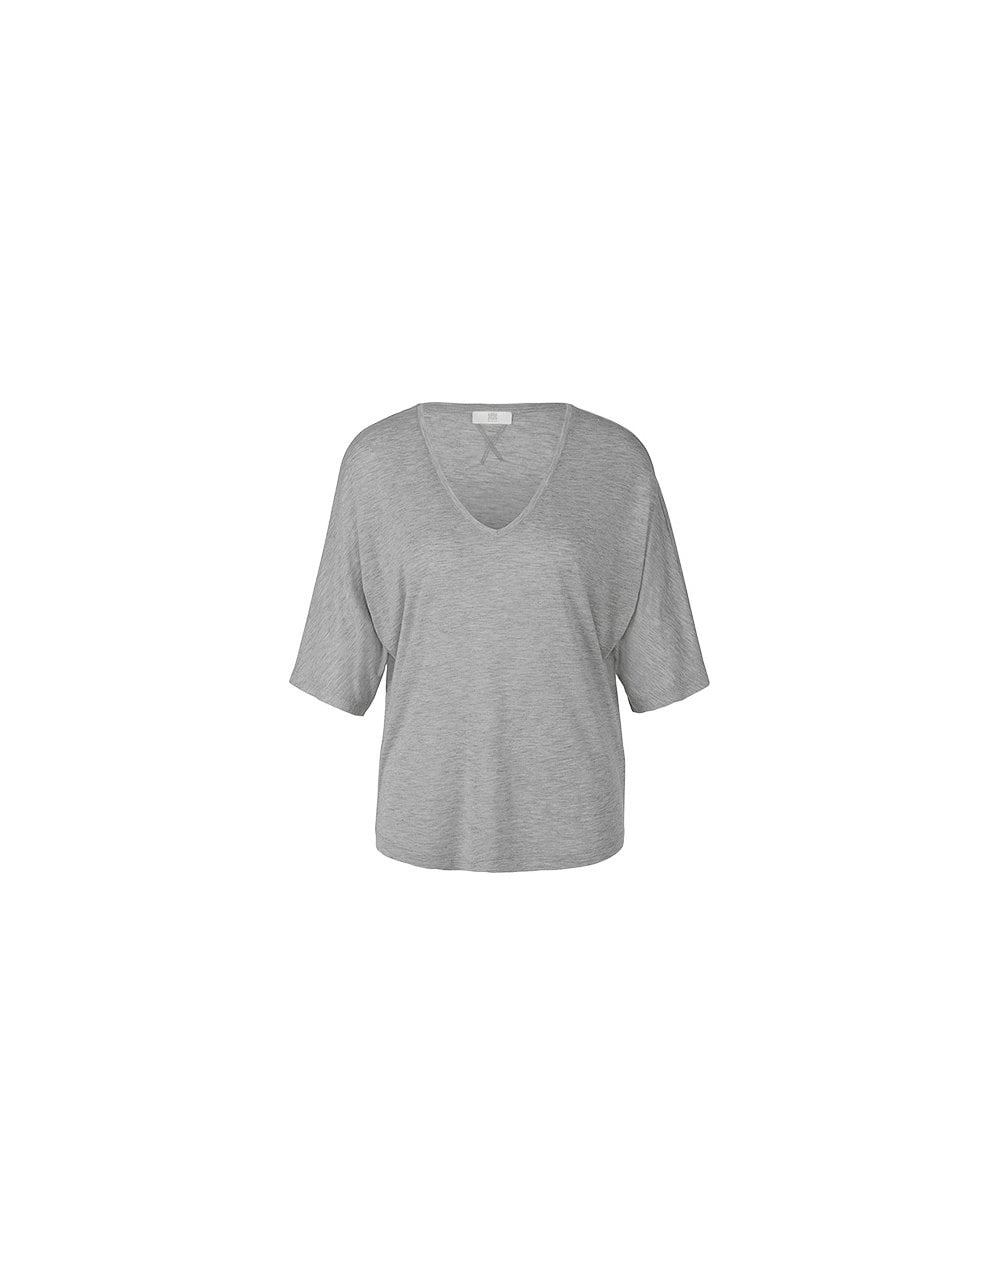 Riani Riani Casual Fit V Neck Jersey Sparkle T-shirt Col: 912 Grey, Size: 8